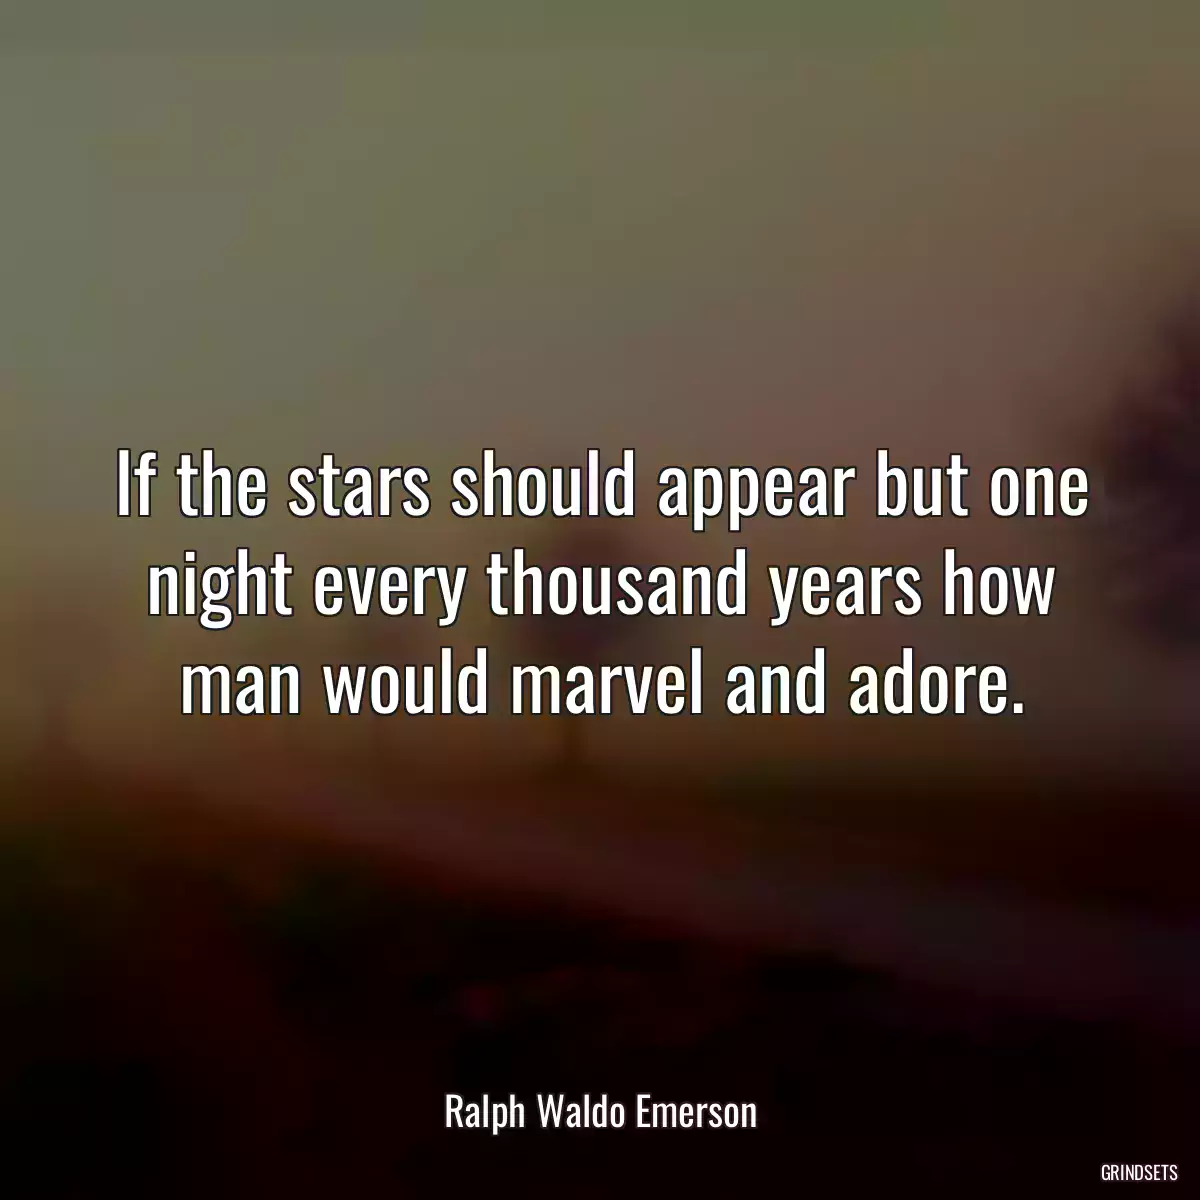 If the stars should appear but one night every thousand years how man would marvel and adore.